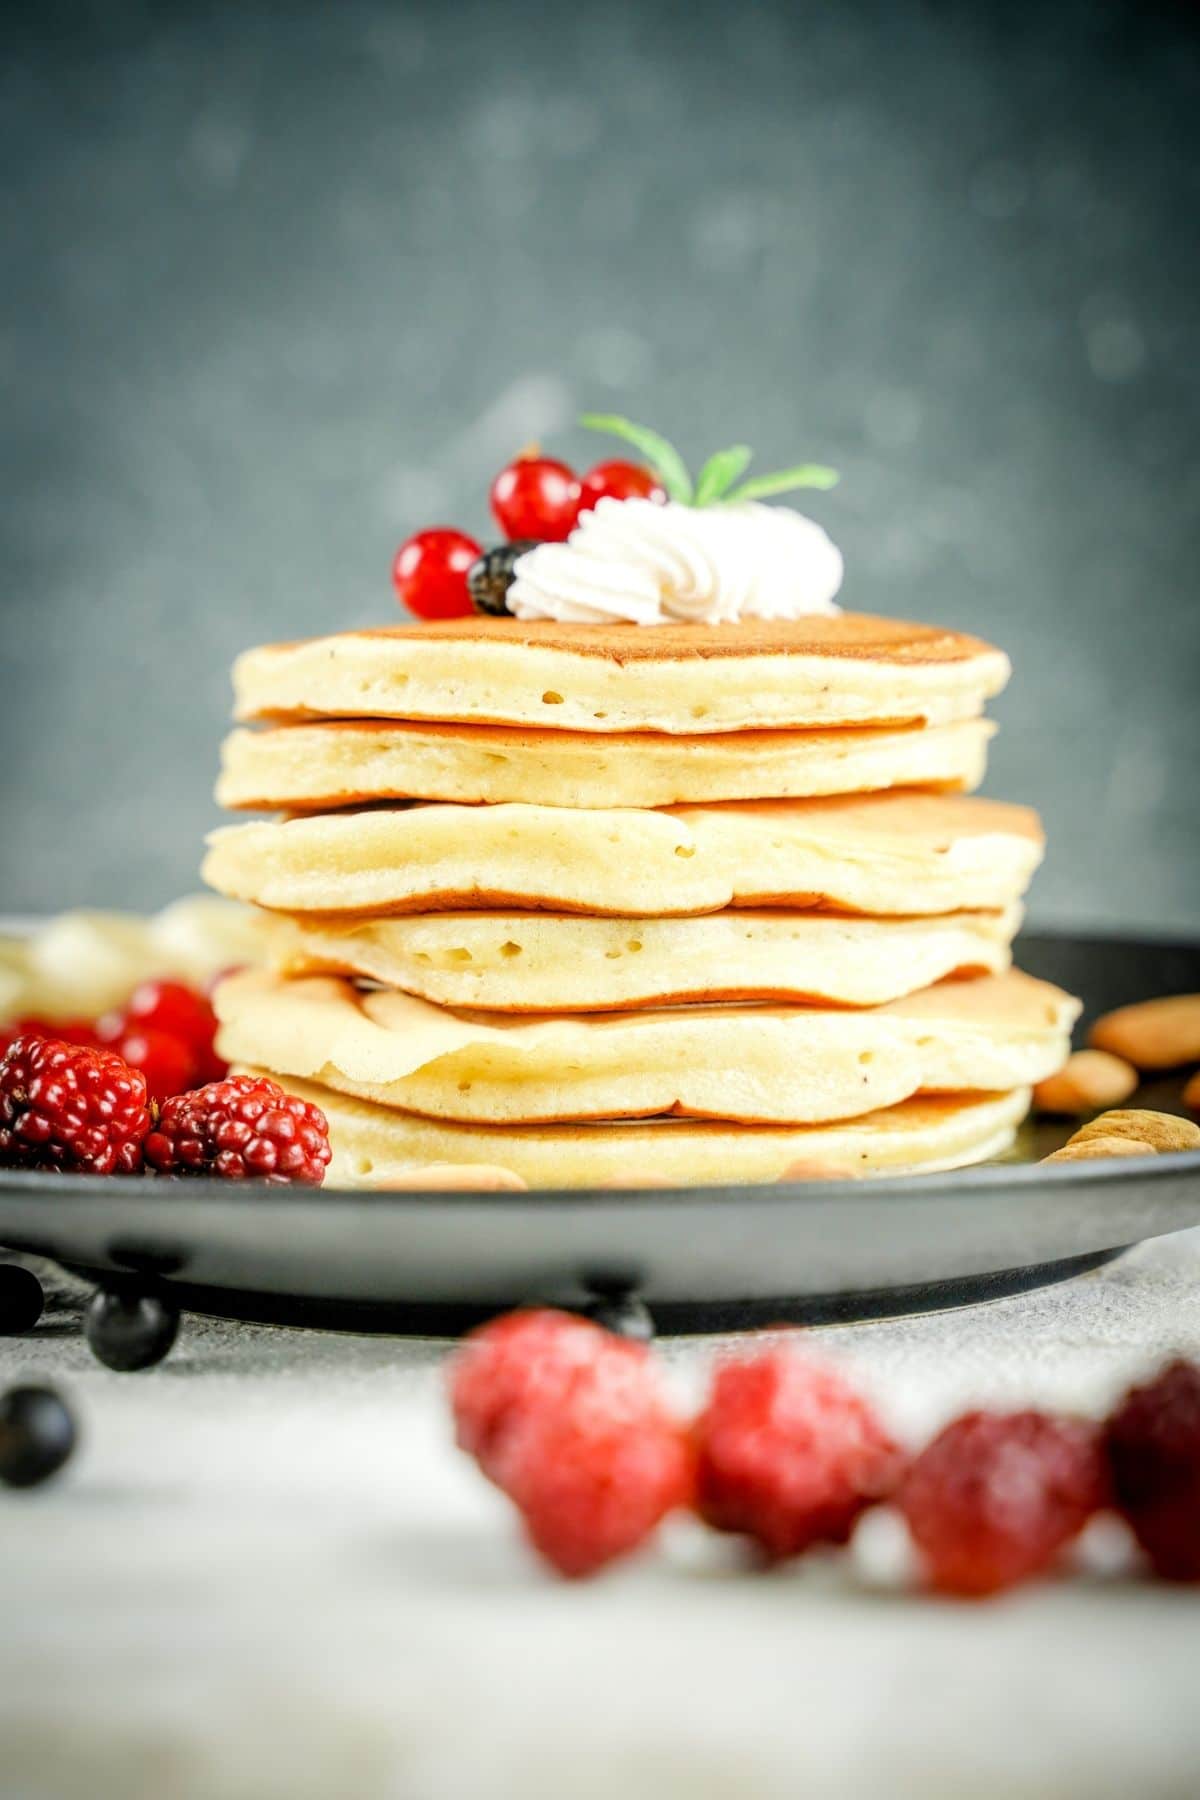 stack of pancakes on gray plate with gray background